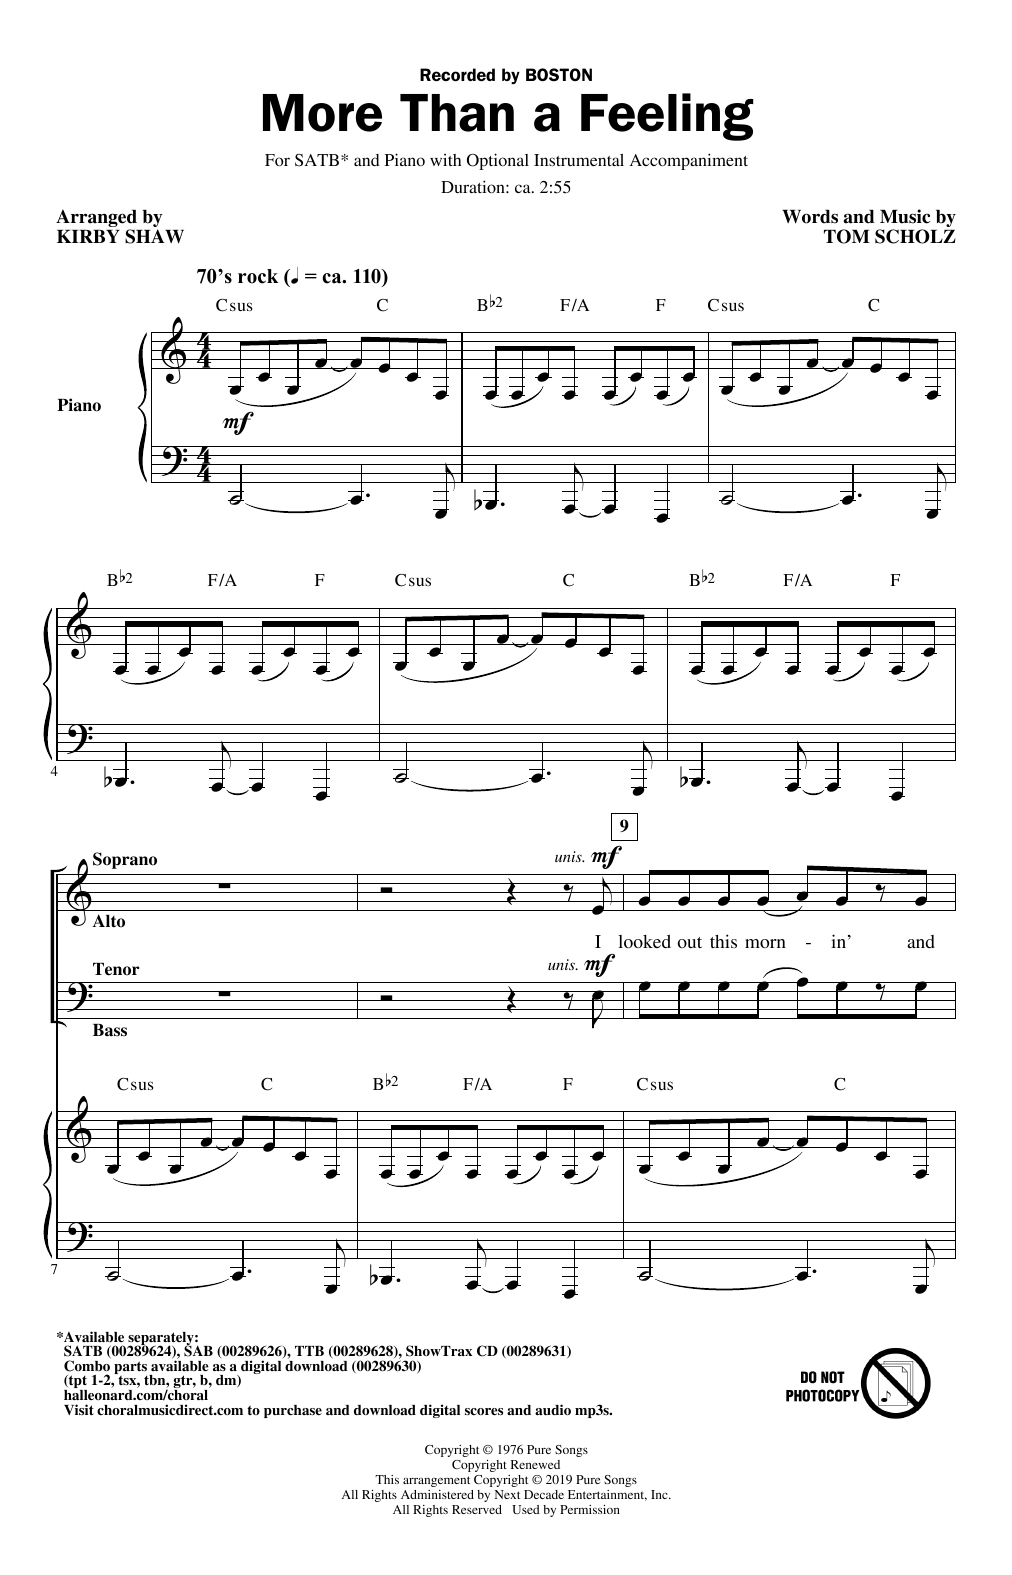 Download Boston More Than a Feeling (arr. Kirby Shaw) Sheet Music